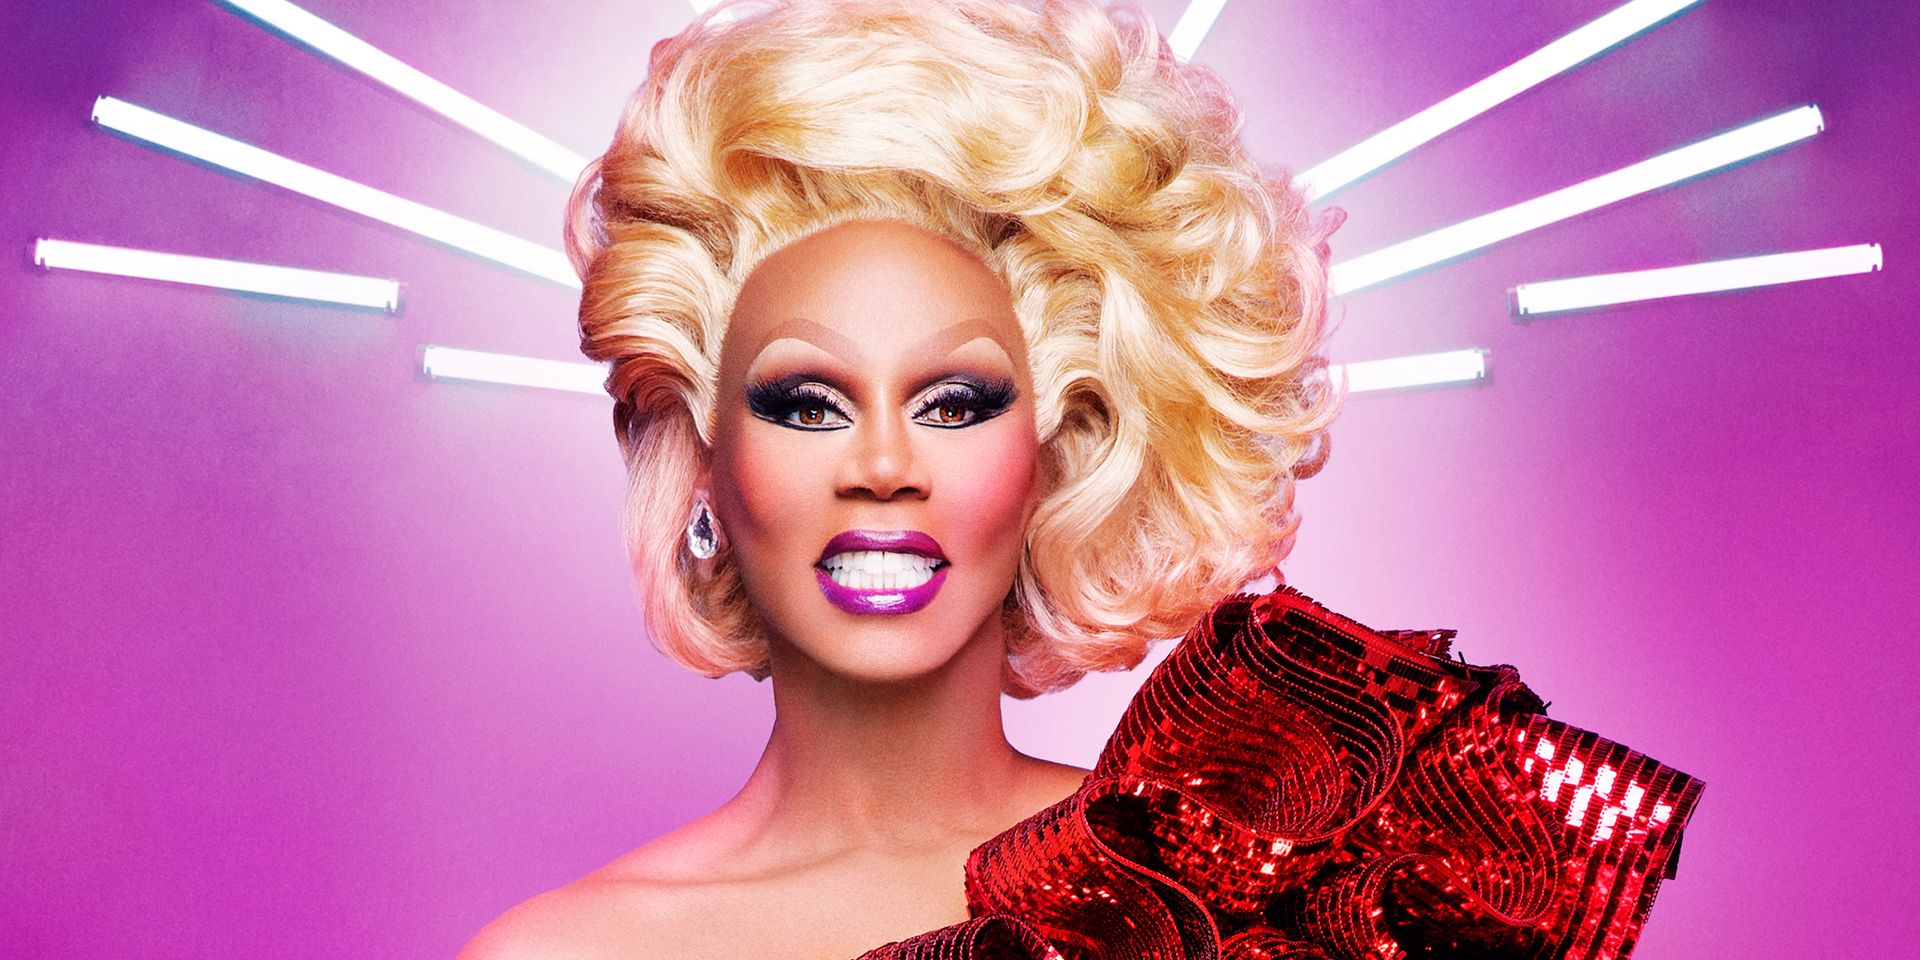 A promotional image for the reality television series RuPaul's Drag Race.